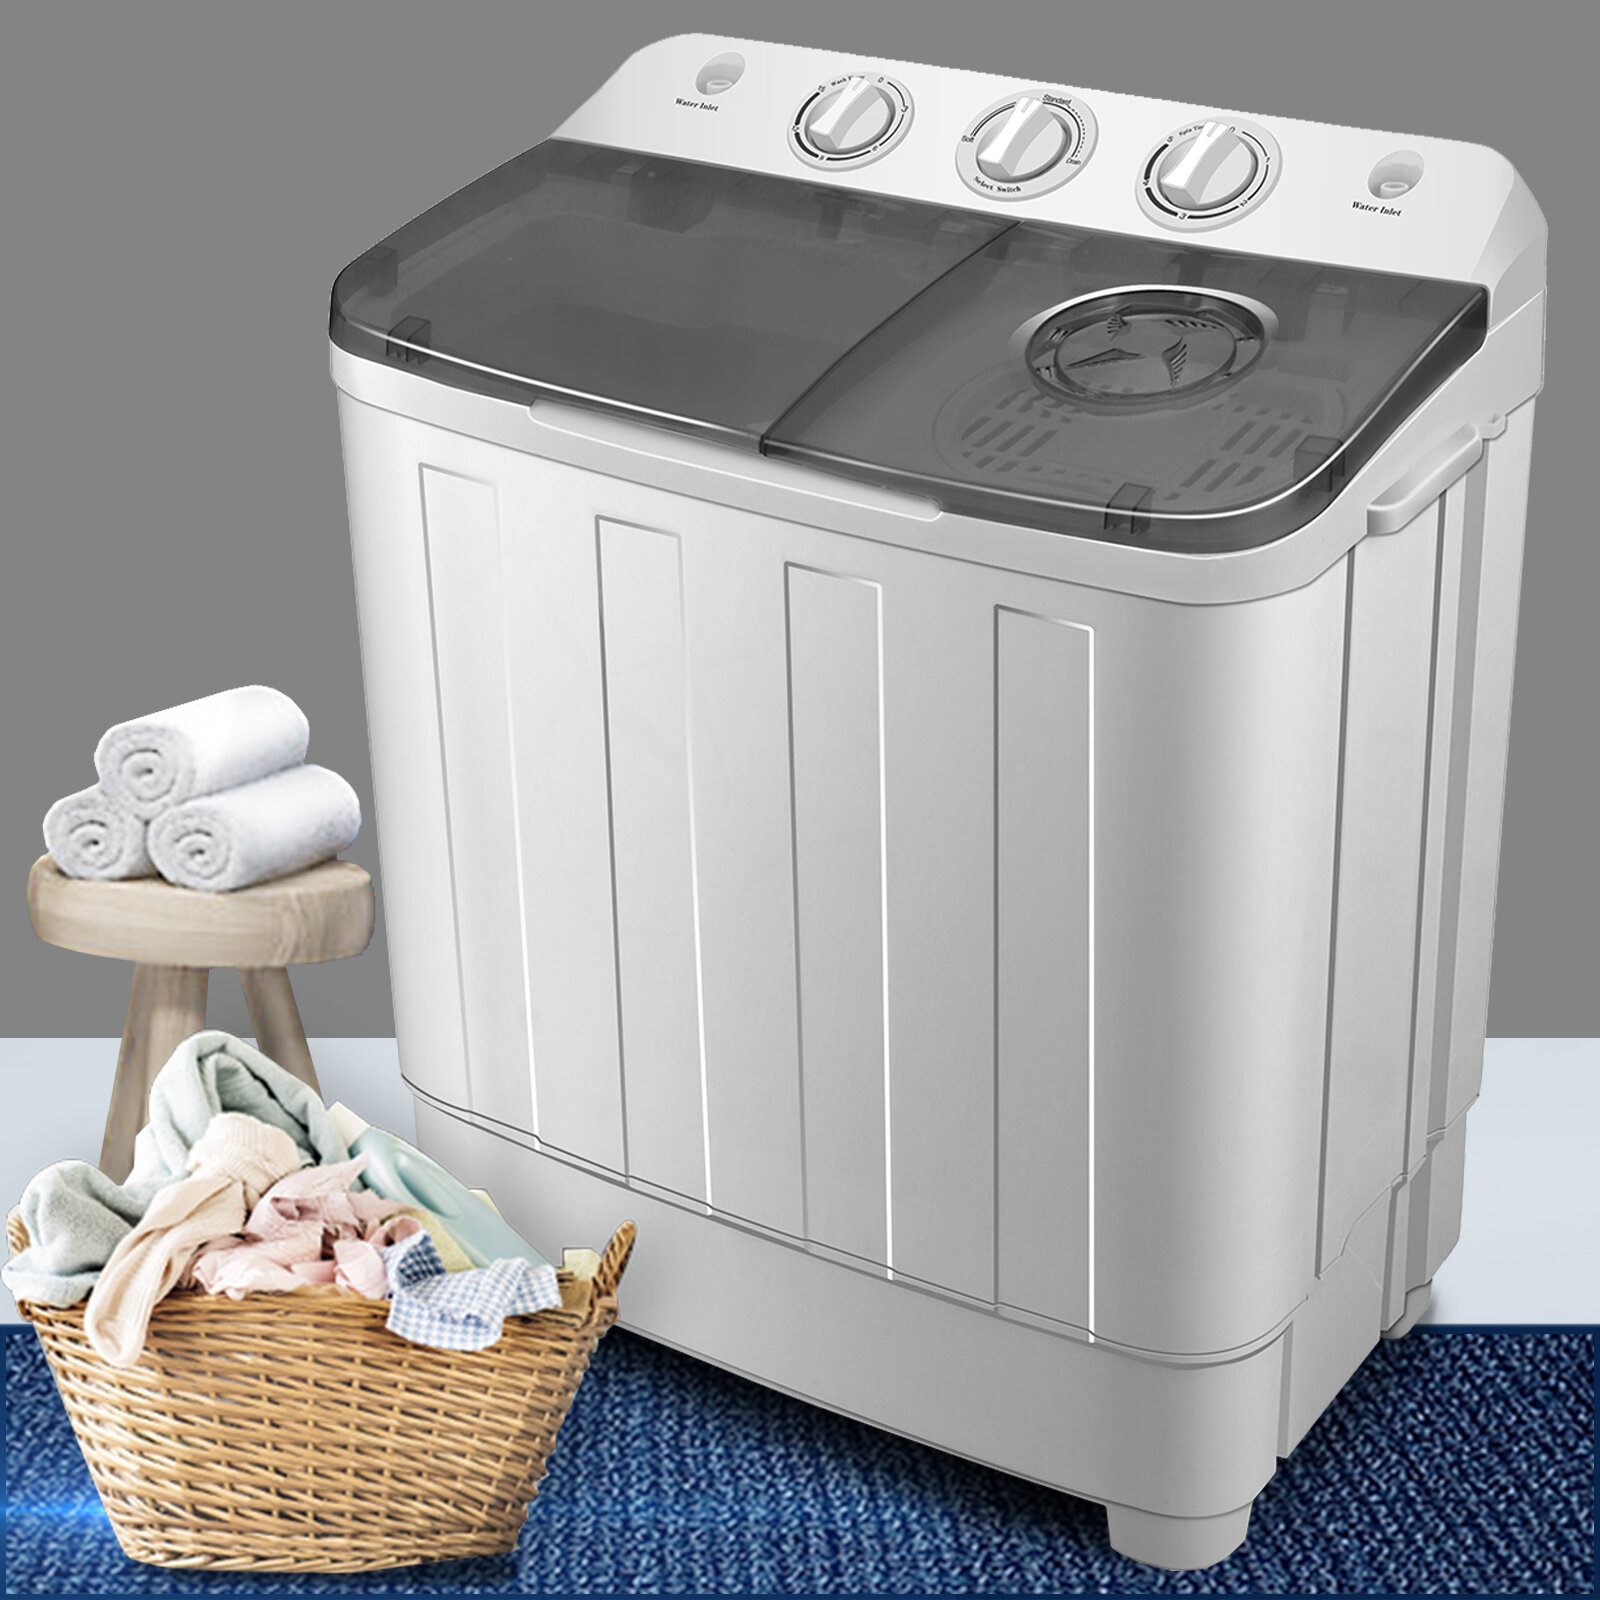 Artist Hand 1 85 Cu Ft High Efficiency Portable Washer And Dryer Combo In Gray Reviews Wayfair,What Do Mice Eat